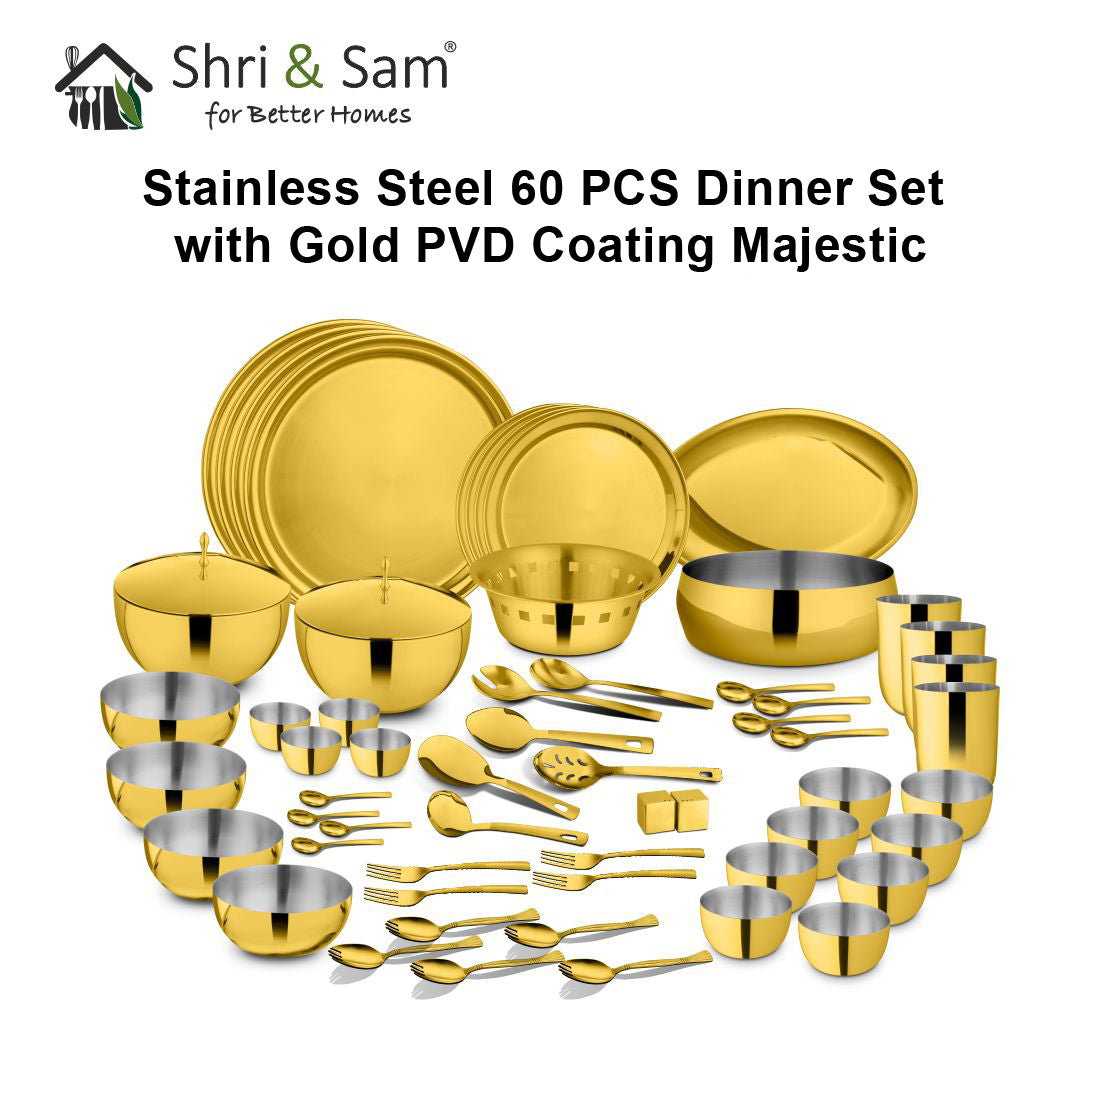 Stainless Steel 60 PCS Dinner Set (4 People) with Gold PVD Coating Majestic